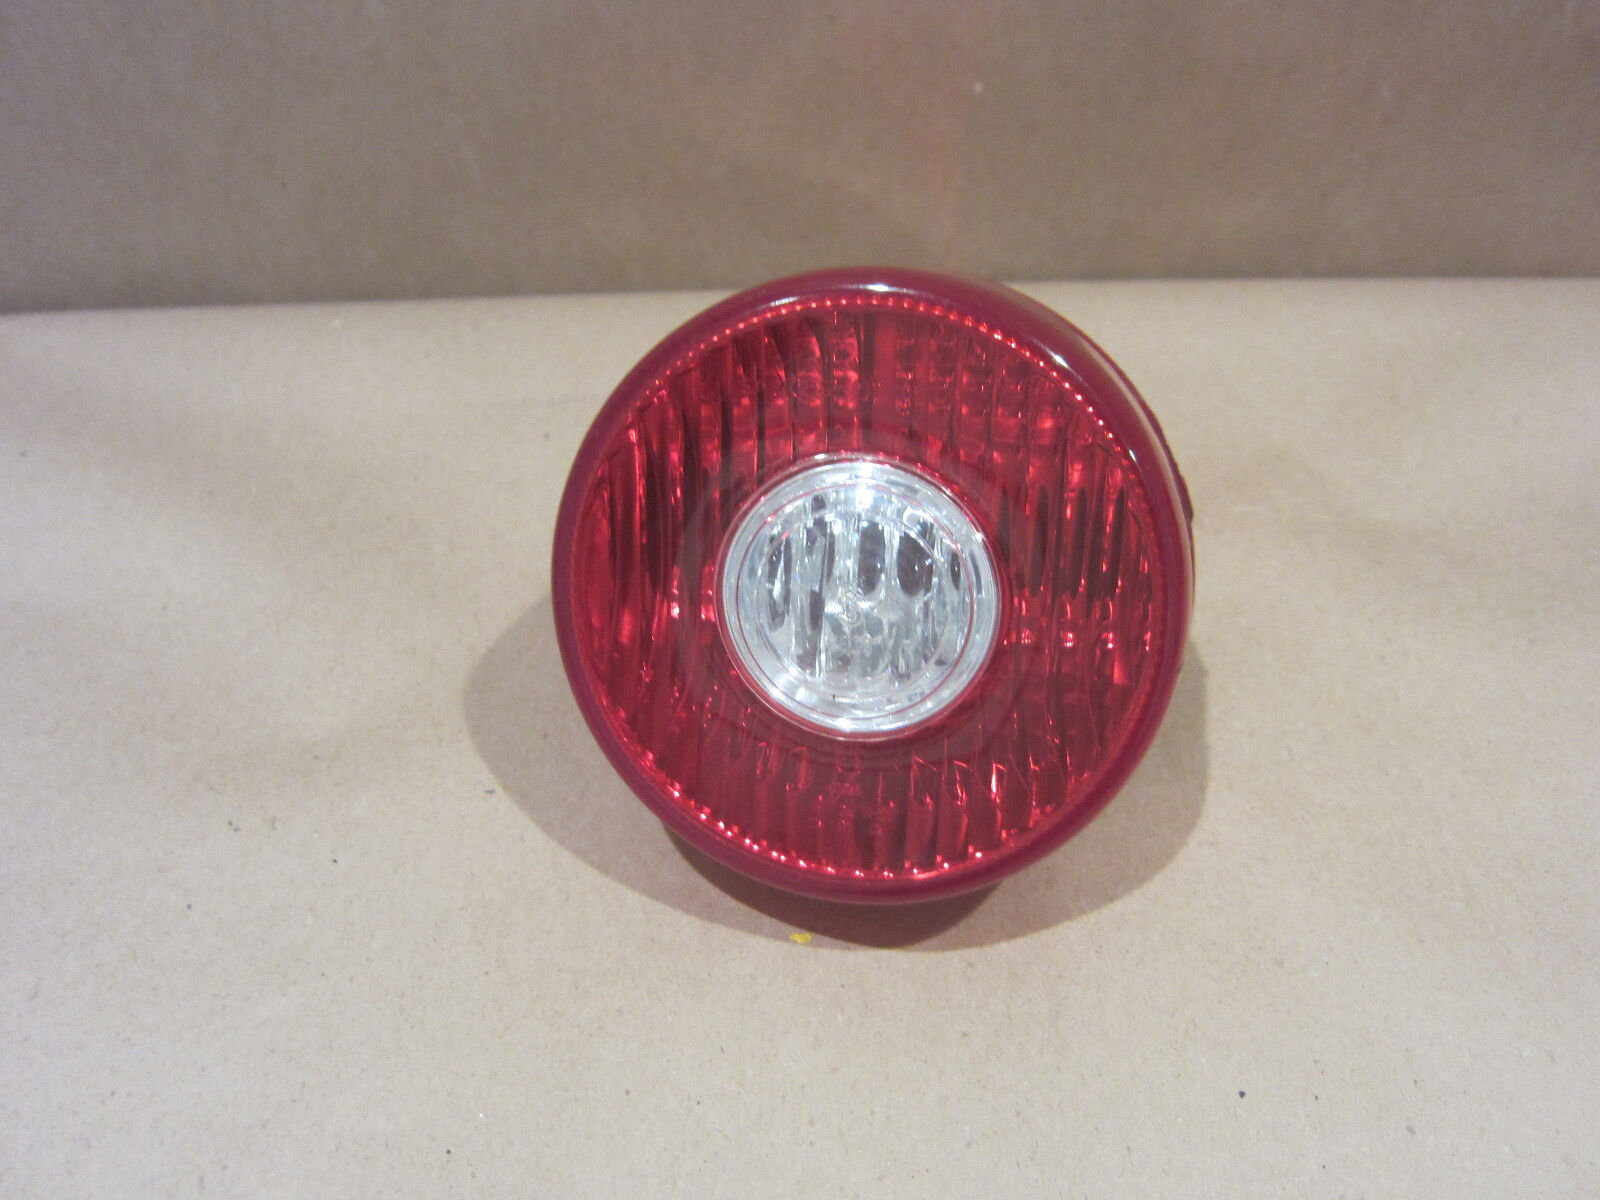 Ferrari 430, Enzo  - LH Rear Outer Tail Light - USED - P/N 193183